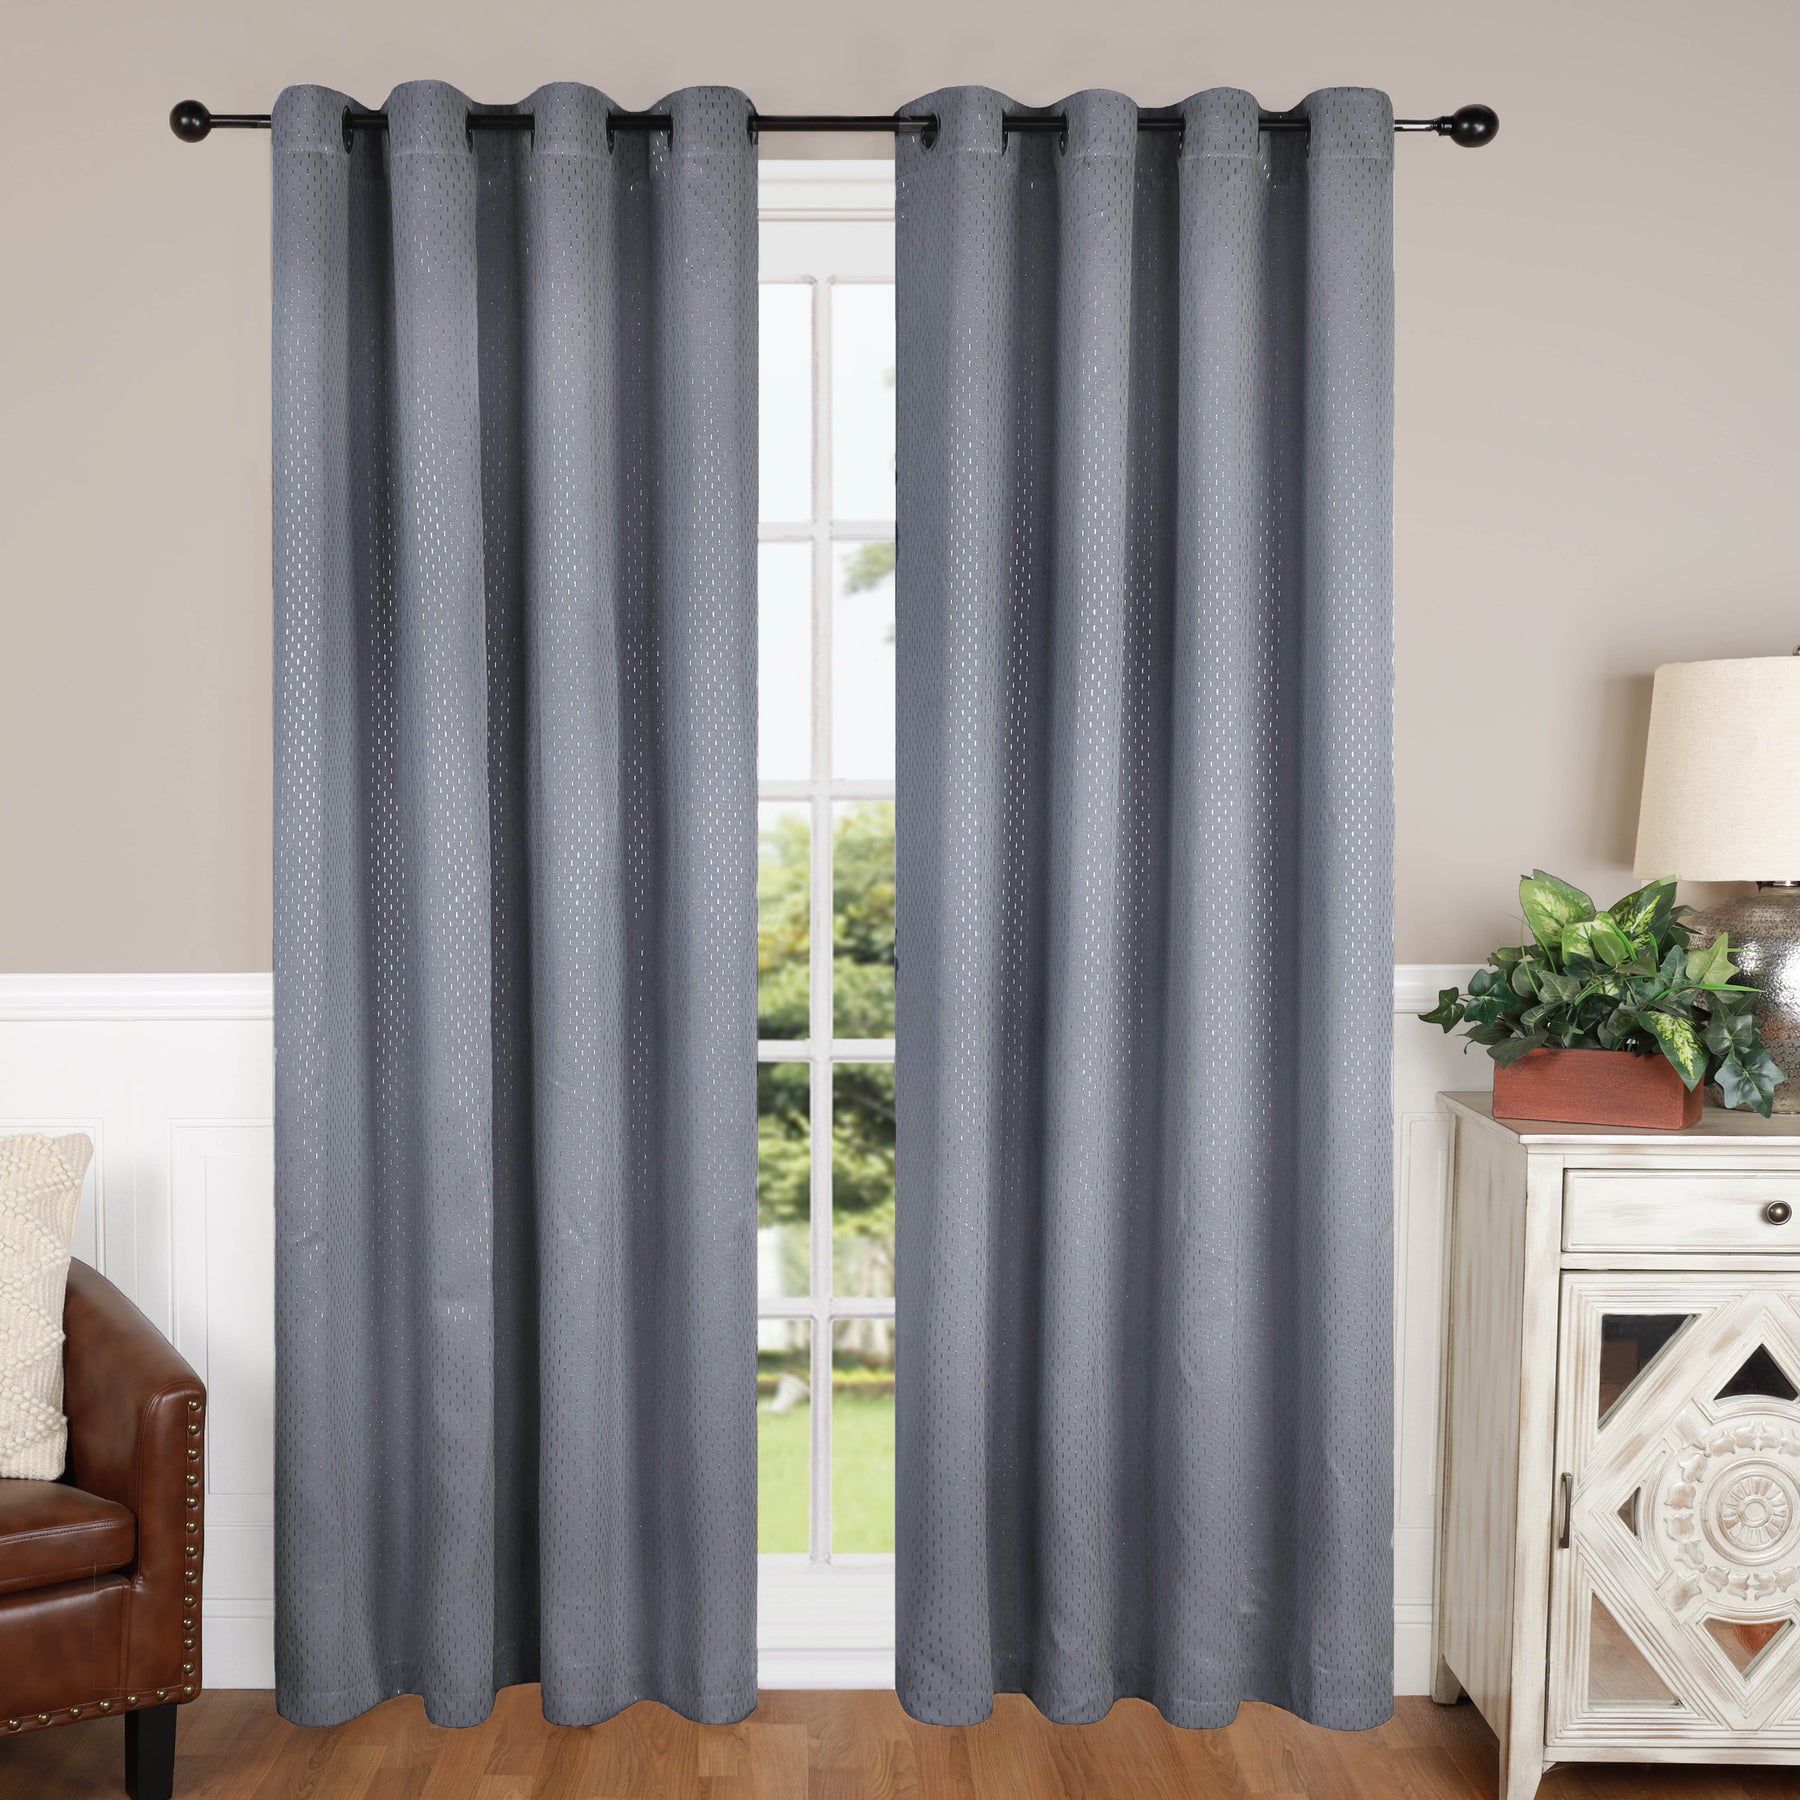 Blackout Solid Shimmer Grommet Curtain Panel - Silver